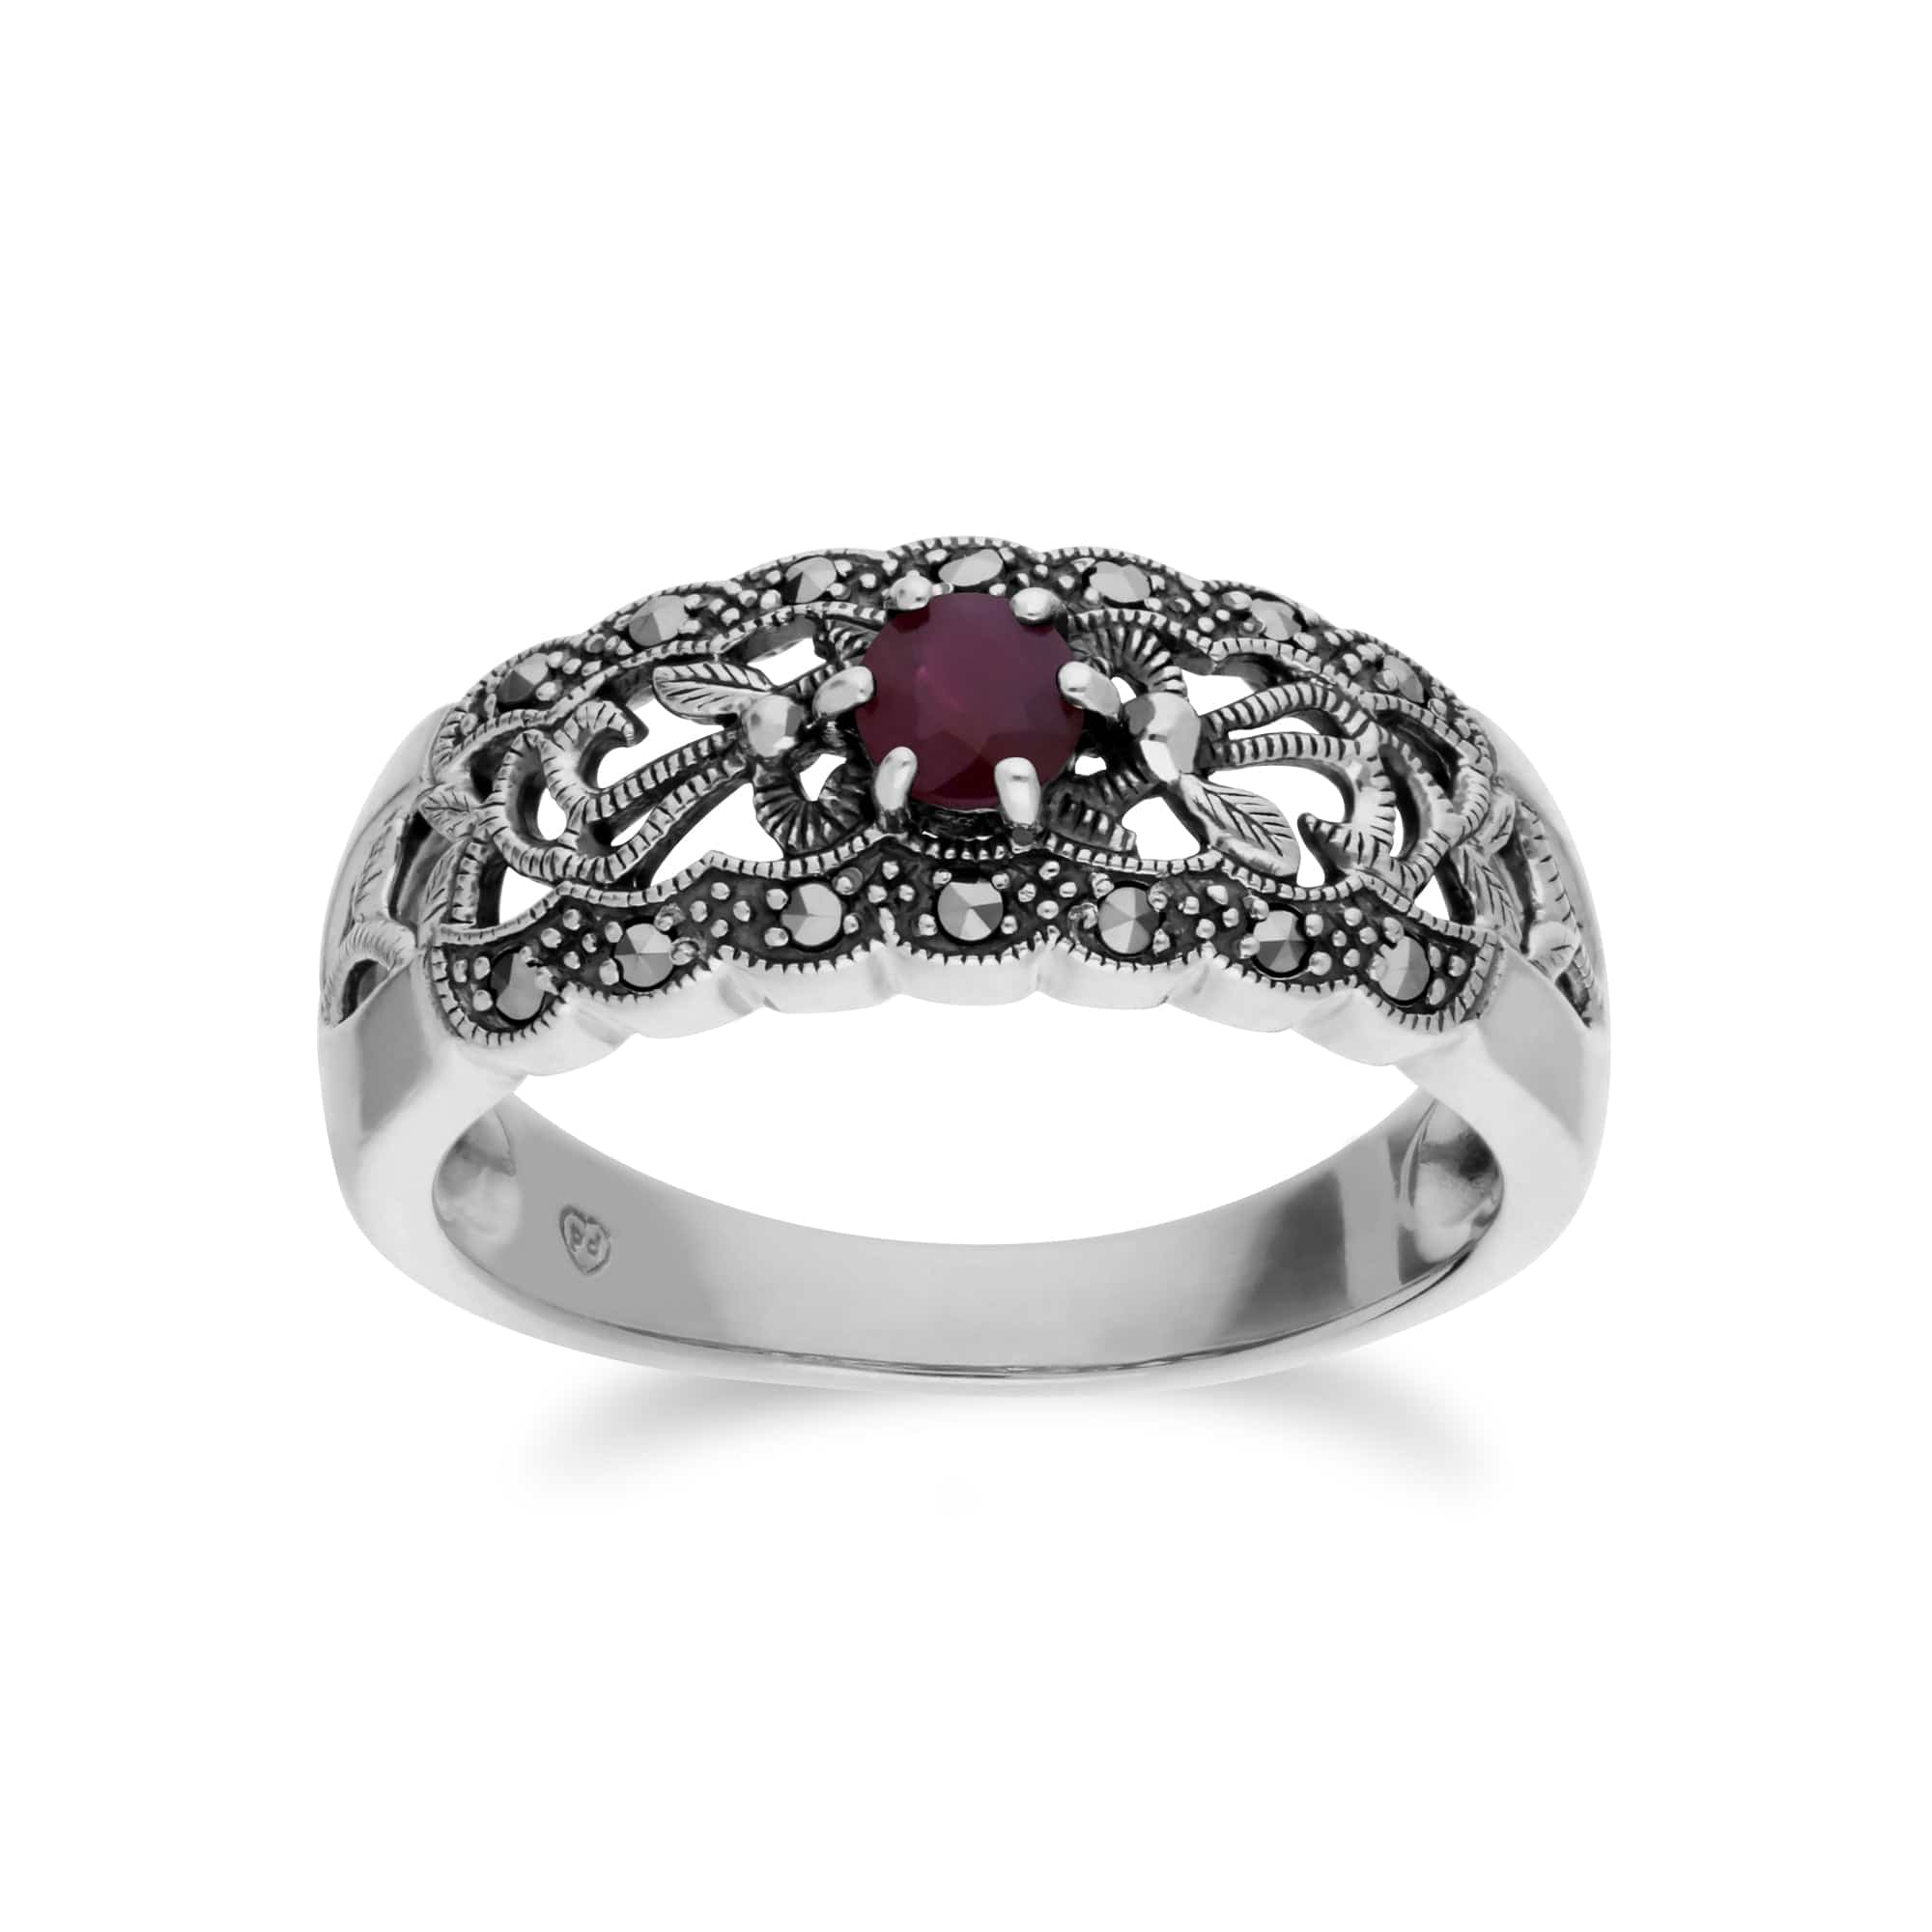 214R597705925 Art Nouveau Style Round Ruby & Marcasite Floral Band Ring in Sterling Silver 1